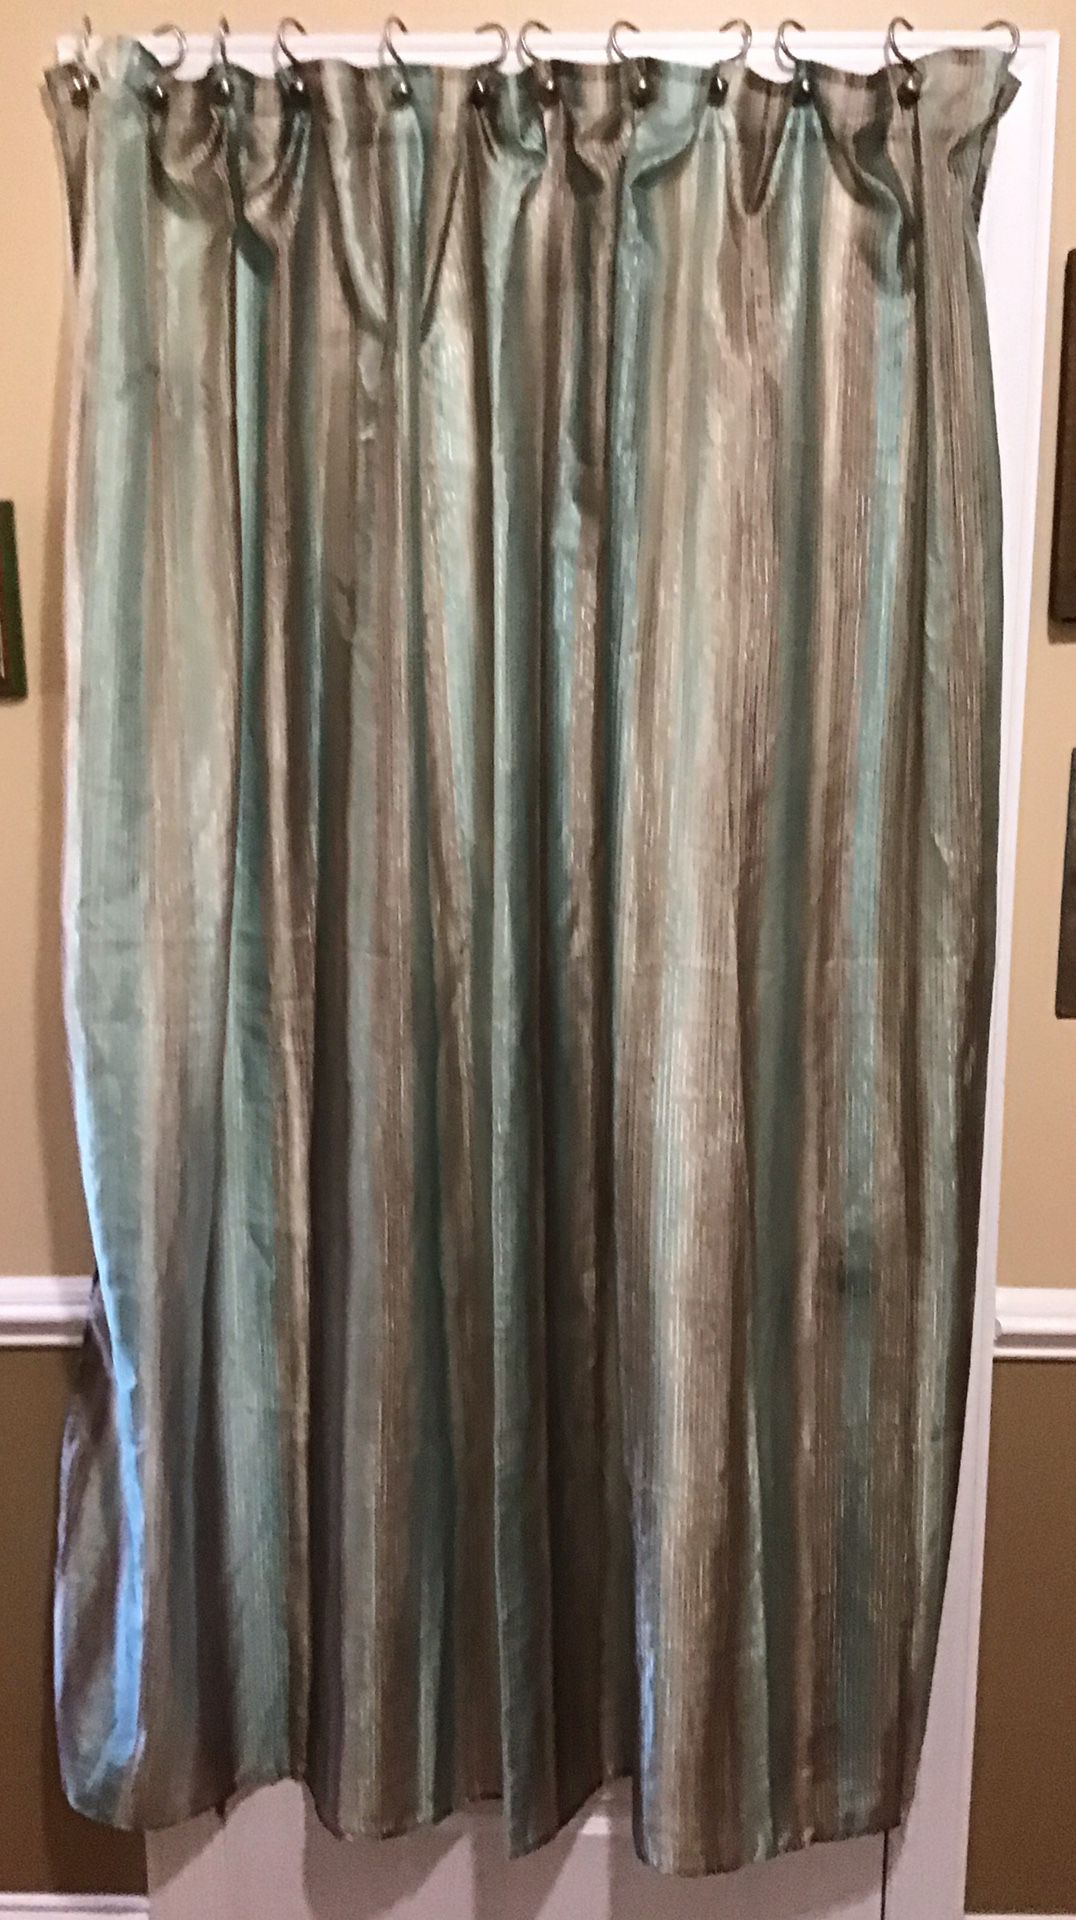 Bacova Polyester and Nylon Easy Care Teal & Espresso Striped Shower Curtain